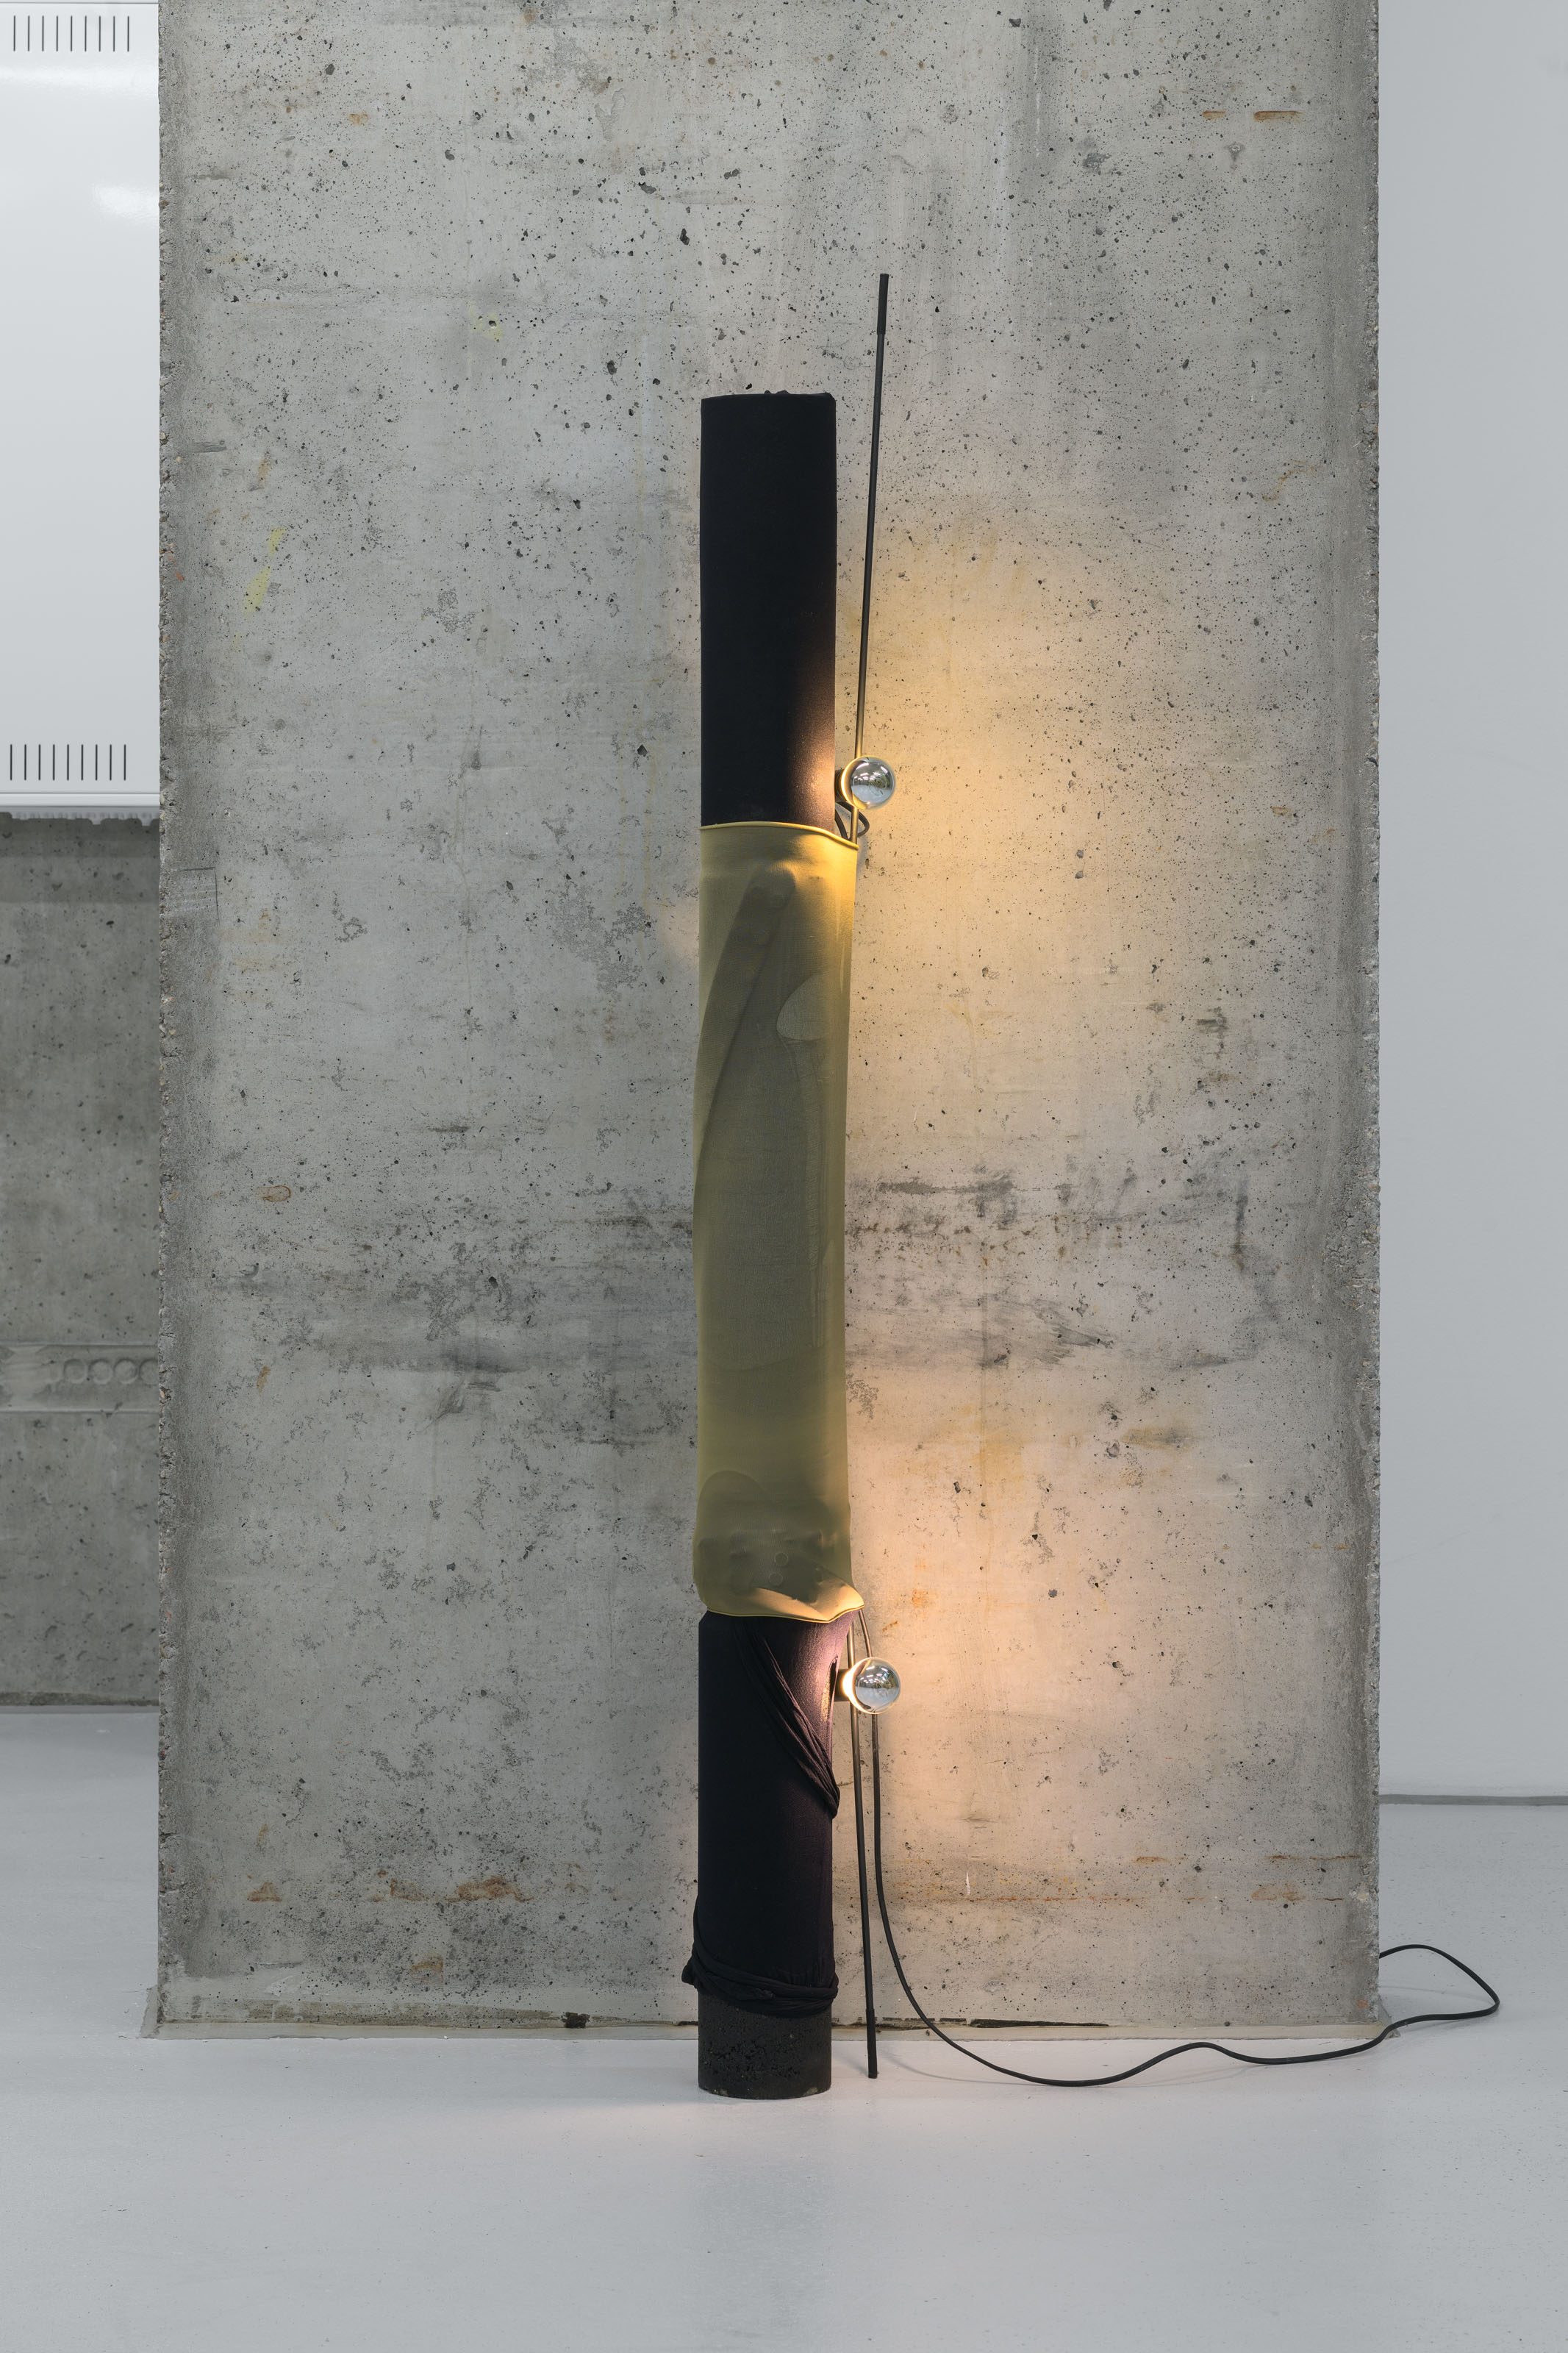 Joseph Bourgois and Lisa Jo, Lamp 2, installation view in Trouble Every Day at Galerie Molitor